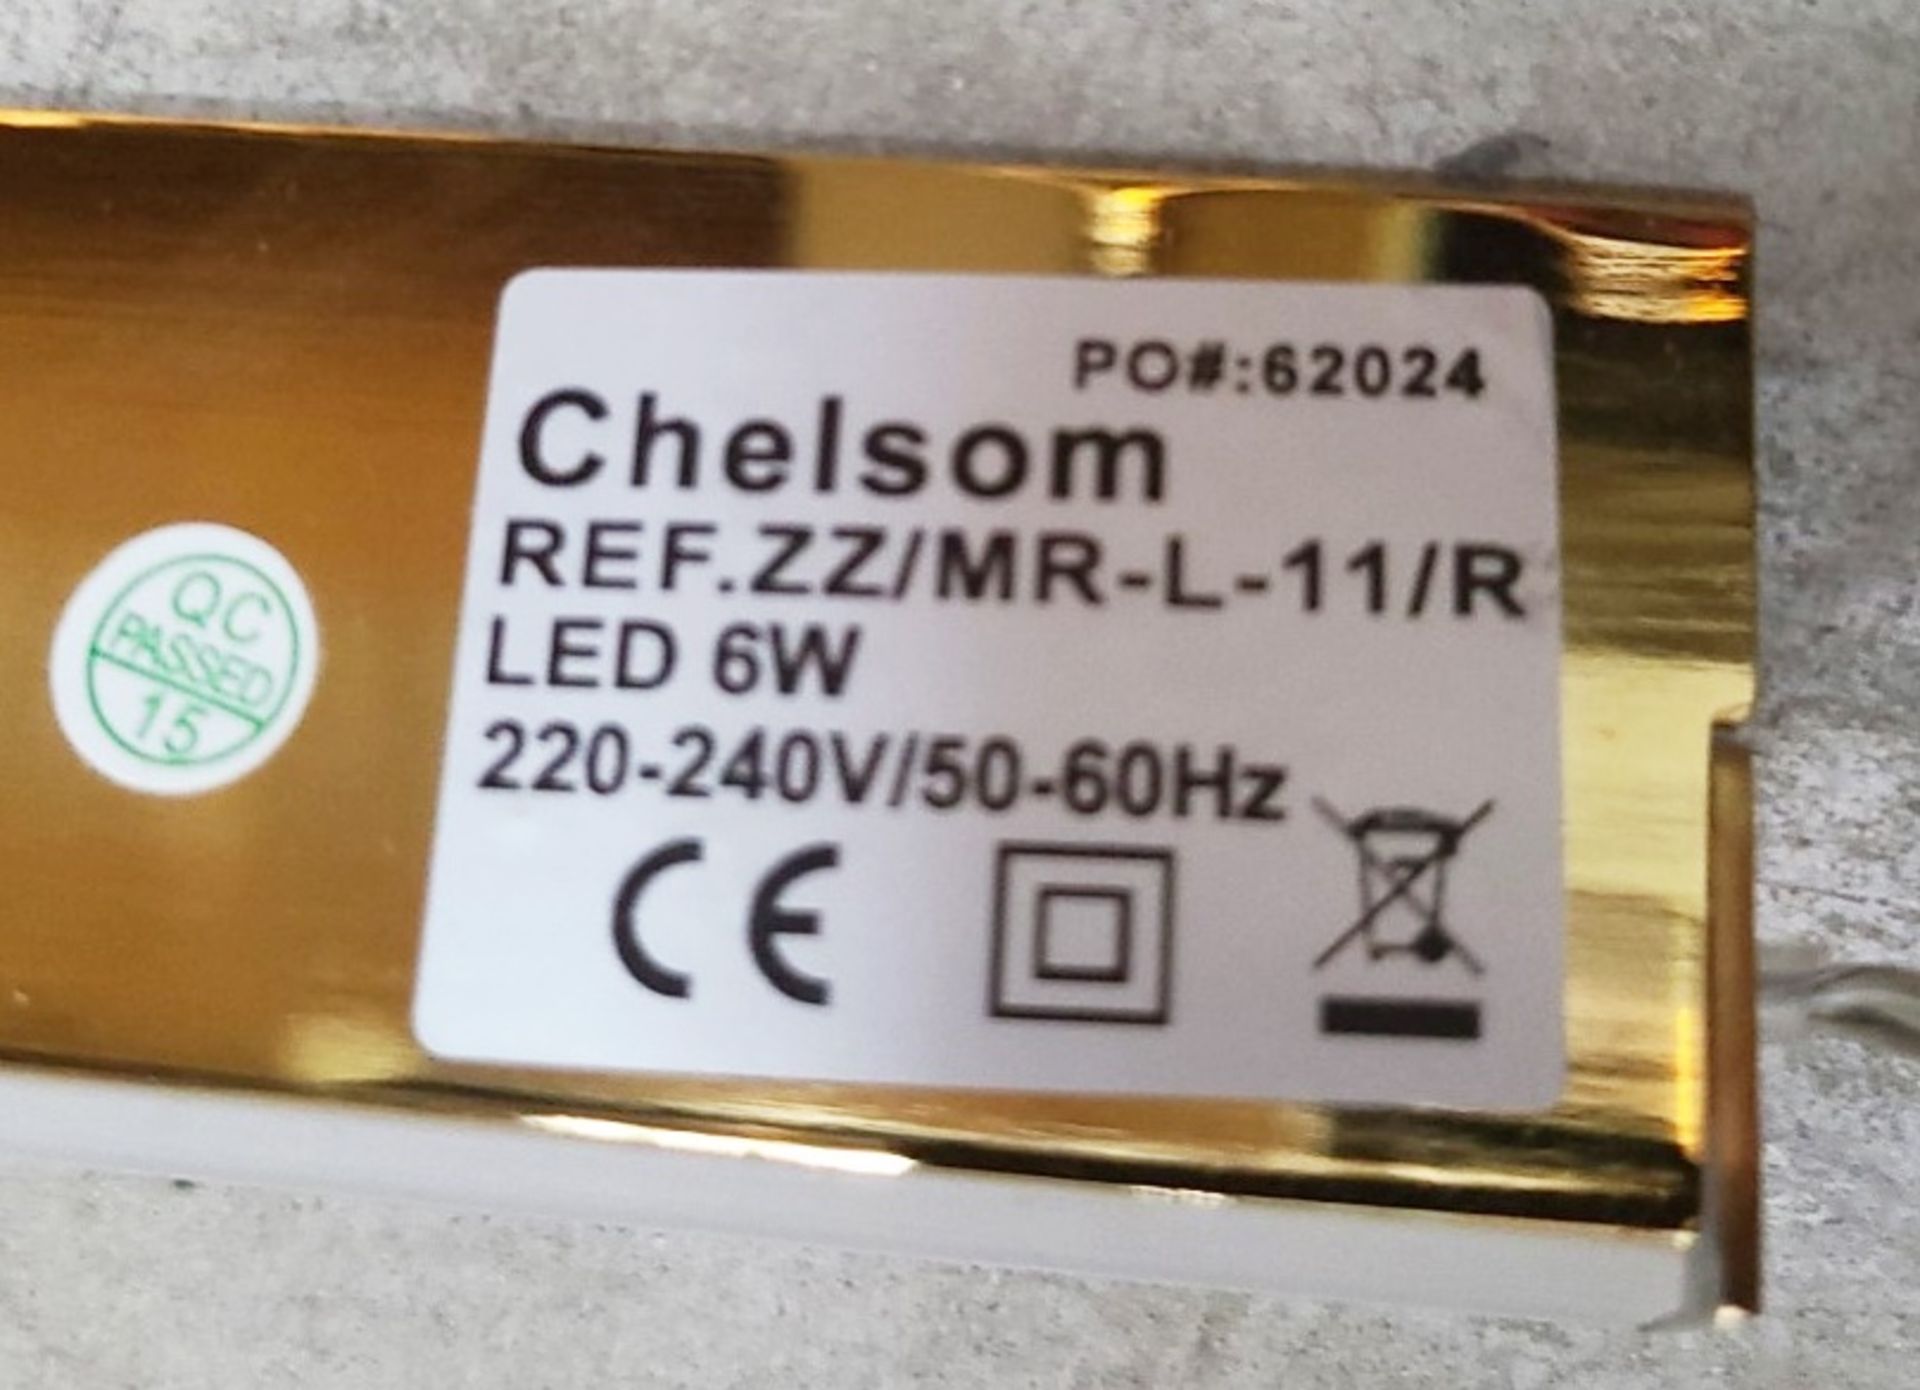 1 x CHELSOM 135cm Wall Mounted Brass Strip Lighting With On/Off Touch Switch For A Beautiful Finish - Image 8 of 8